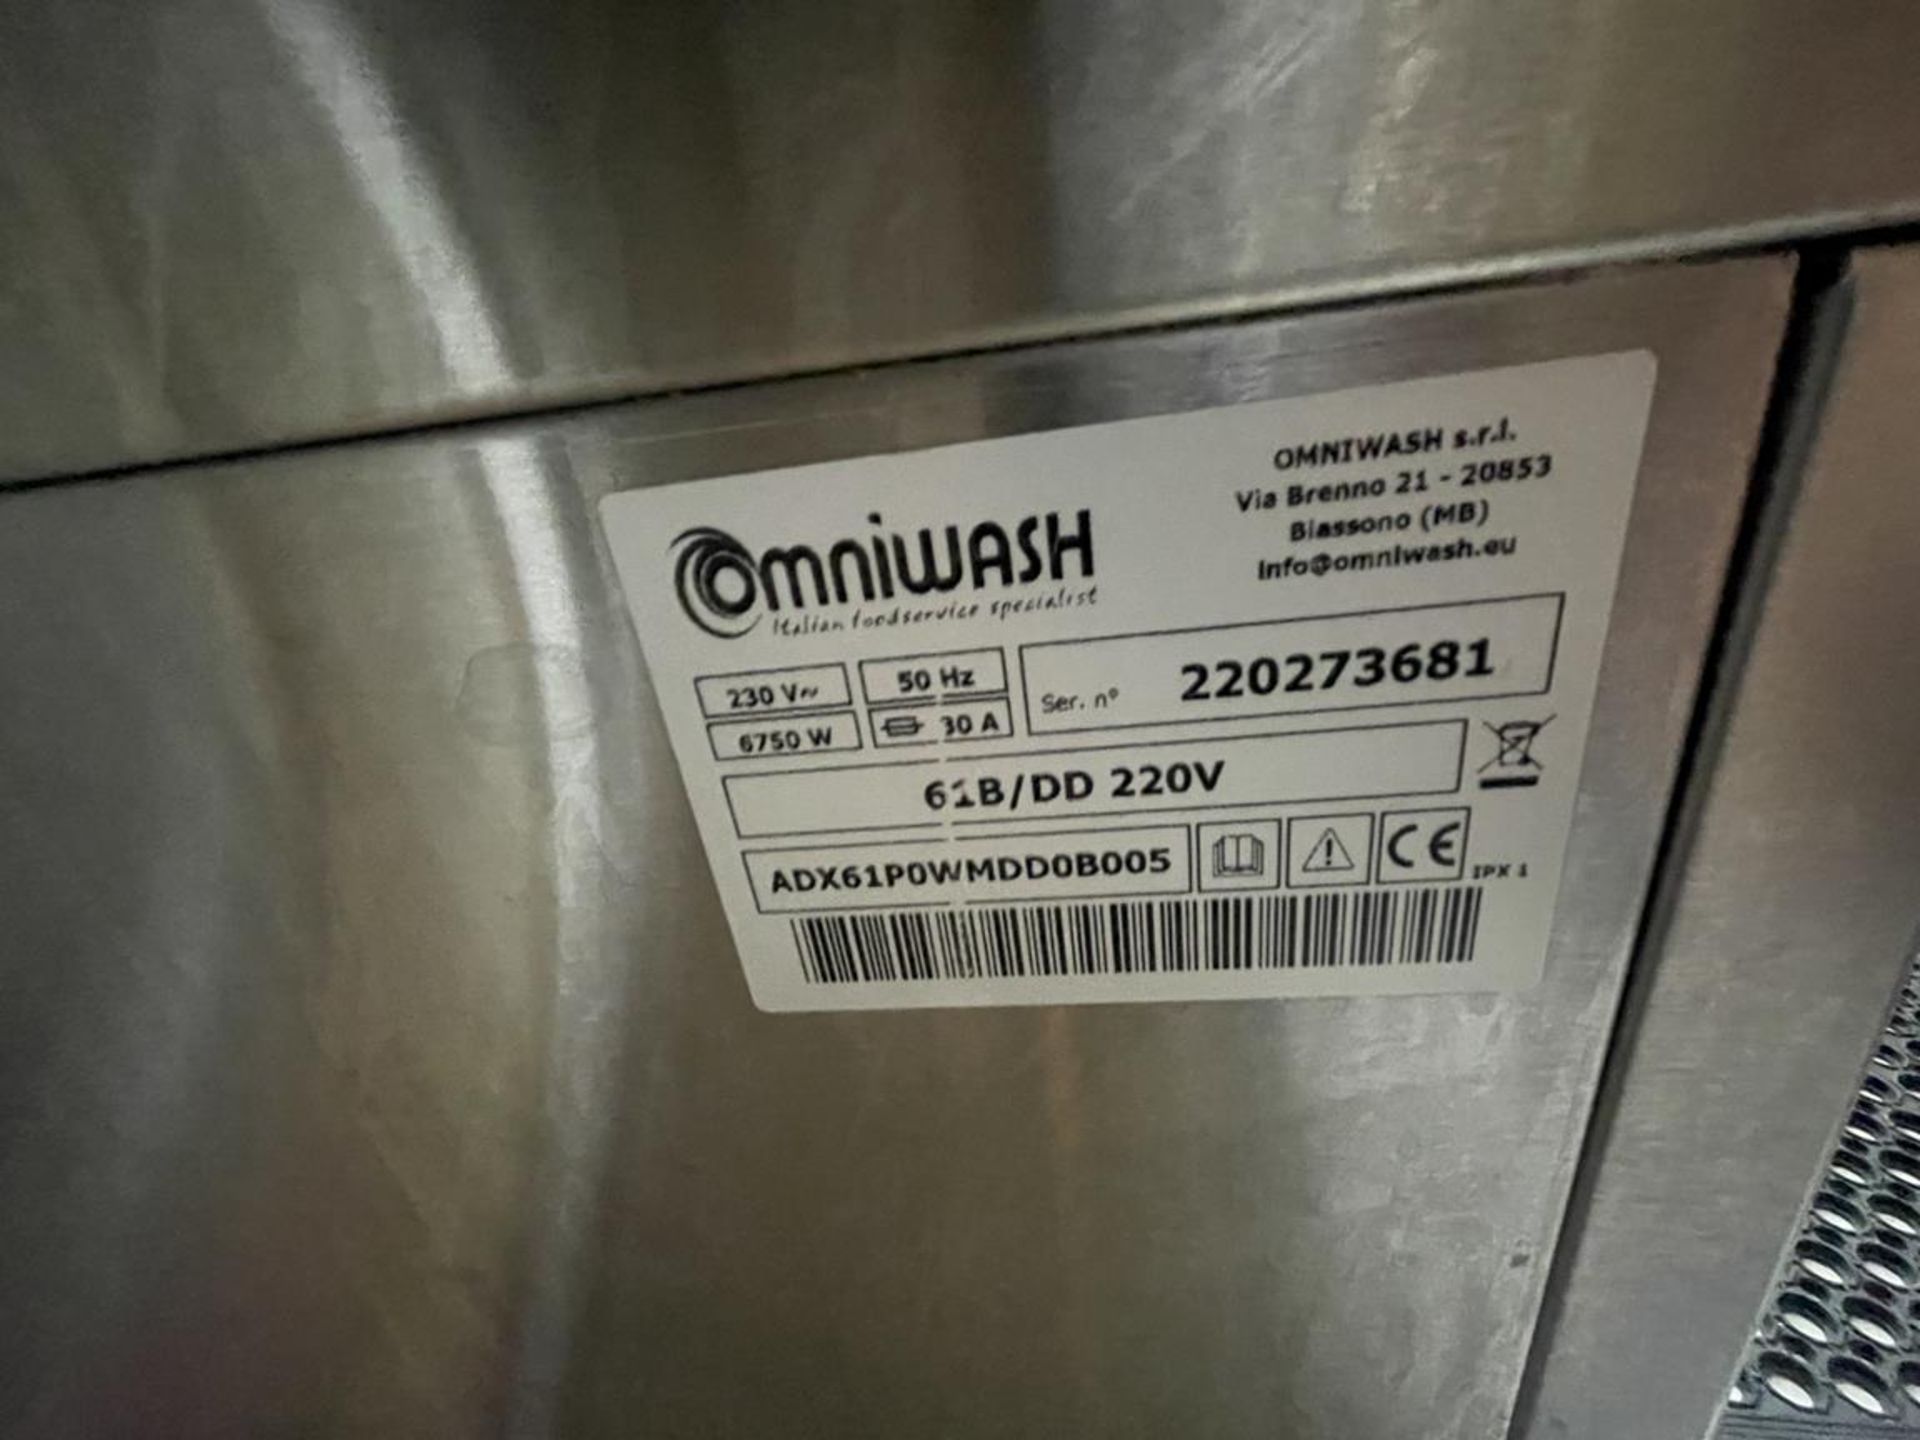 Omniwash, 61B/DD stainless steel pass through dishwasher, Serial No. 220273681 with stainless steel - Image 4 of 7